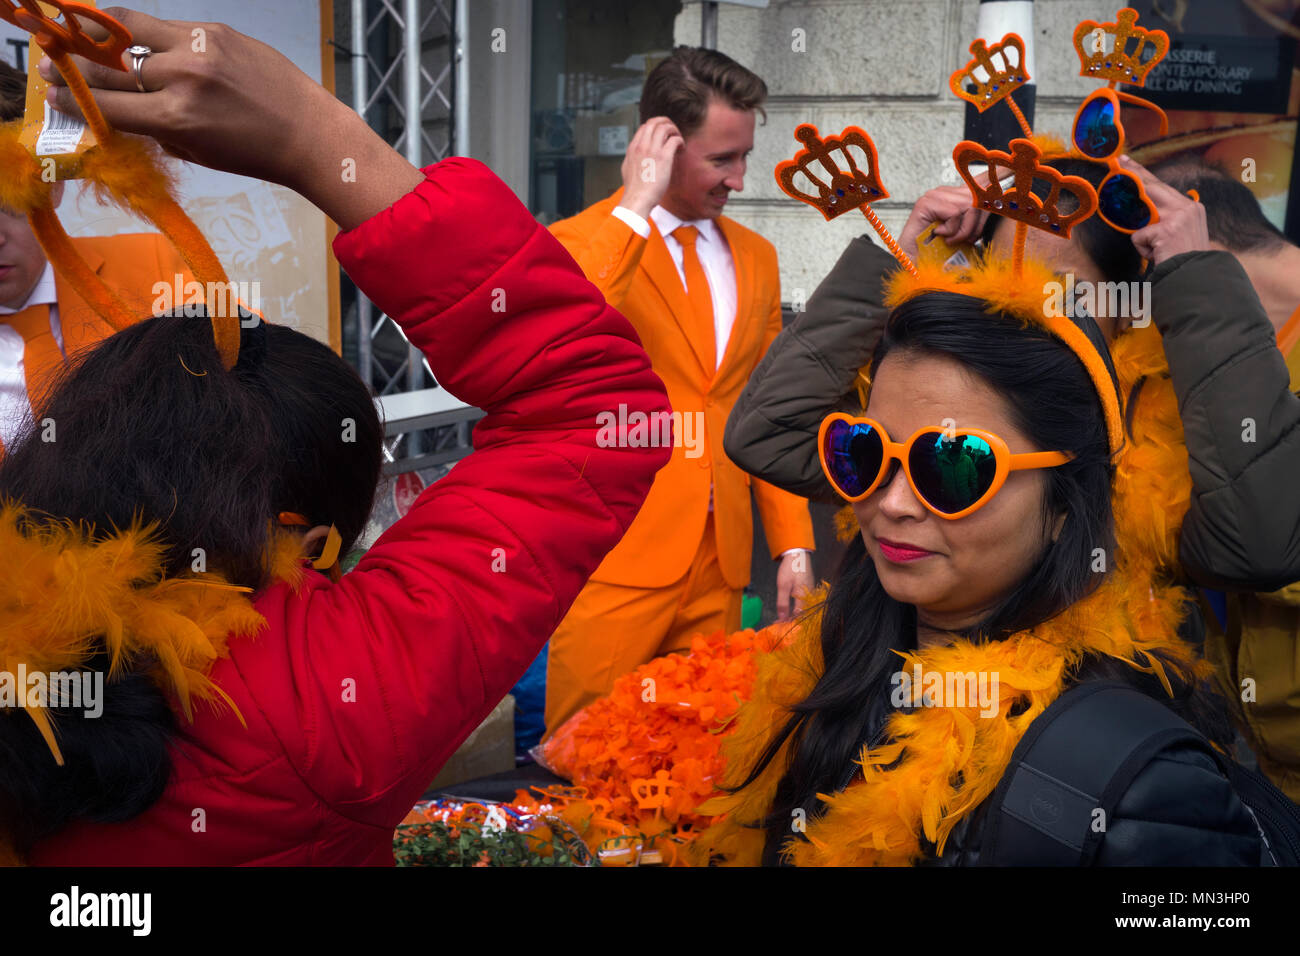 Celebration of King's Day in the city of Amsterdam Stock Photo